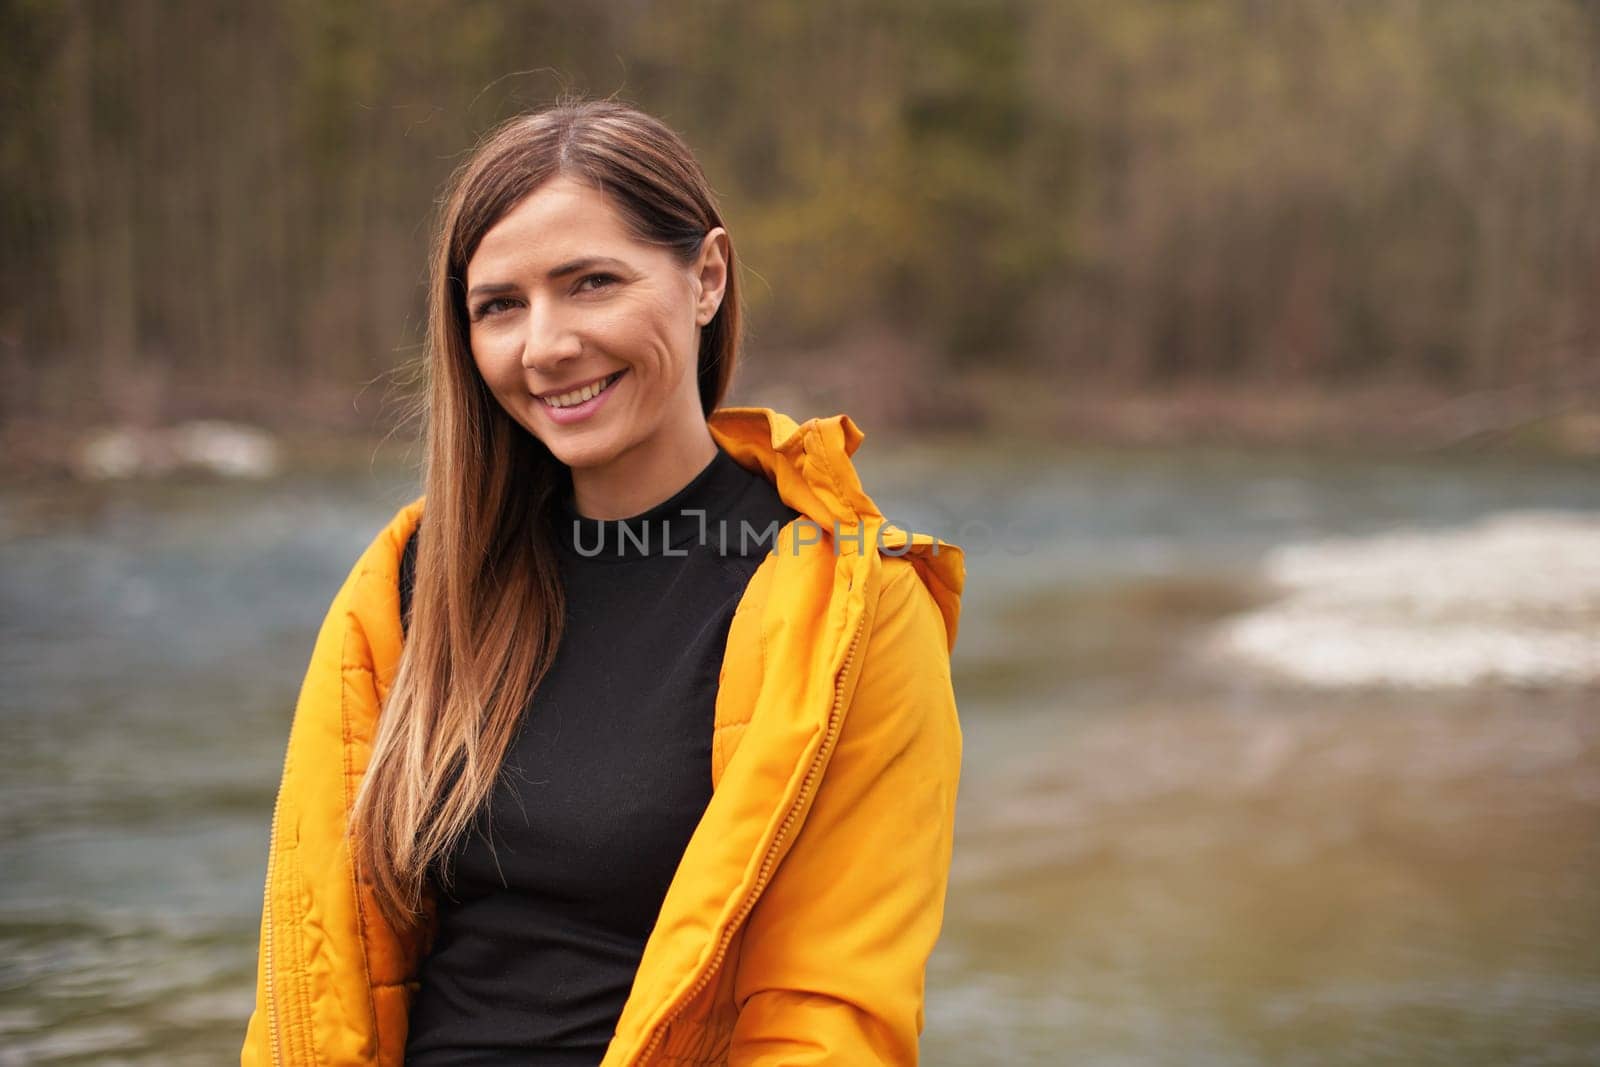 Portrait of young woman in yellow jacket, smiling, long hair down, blurred river background by Ivanko